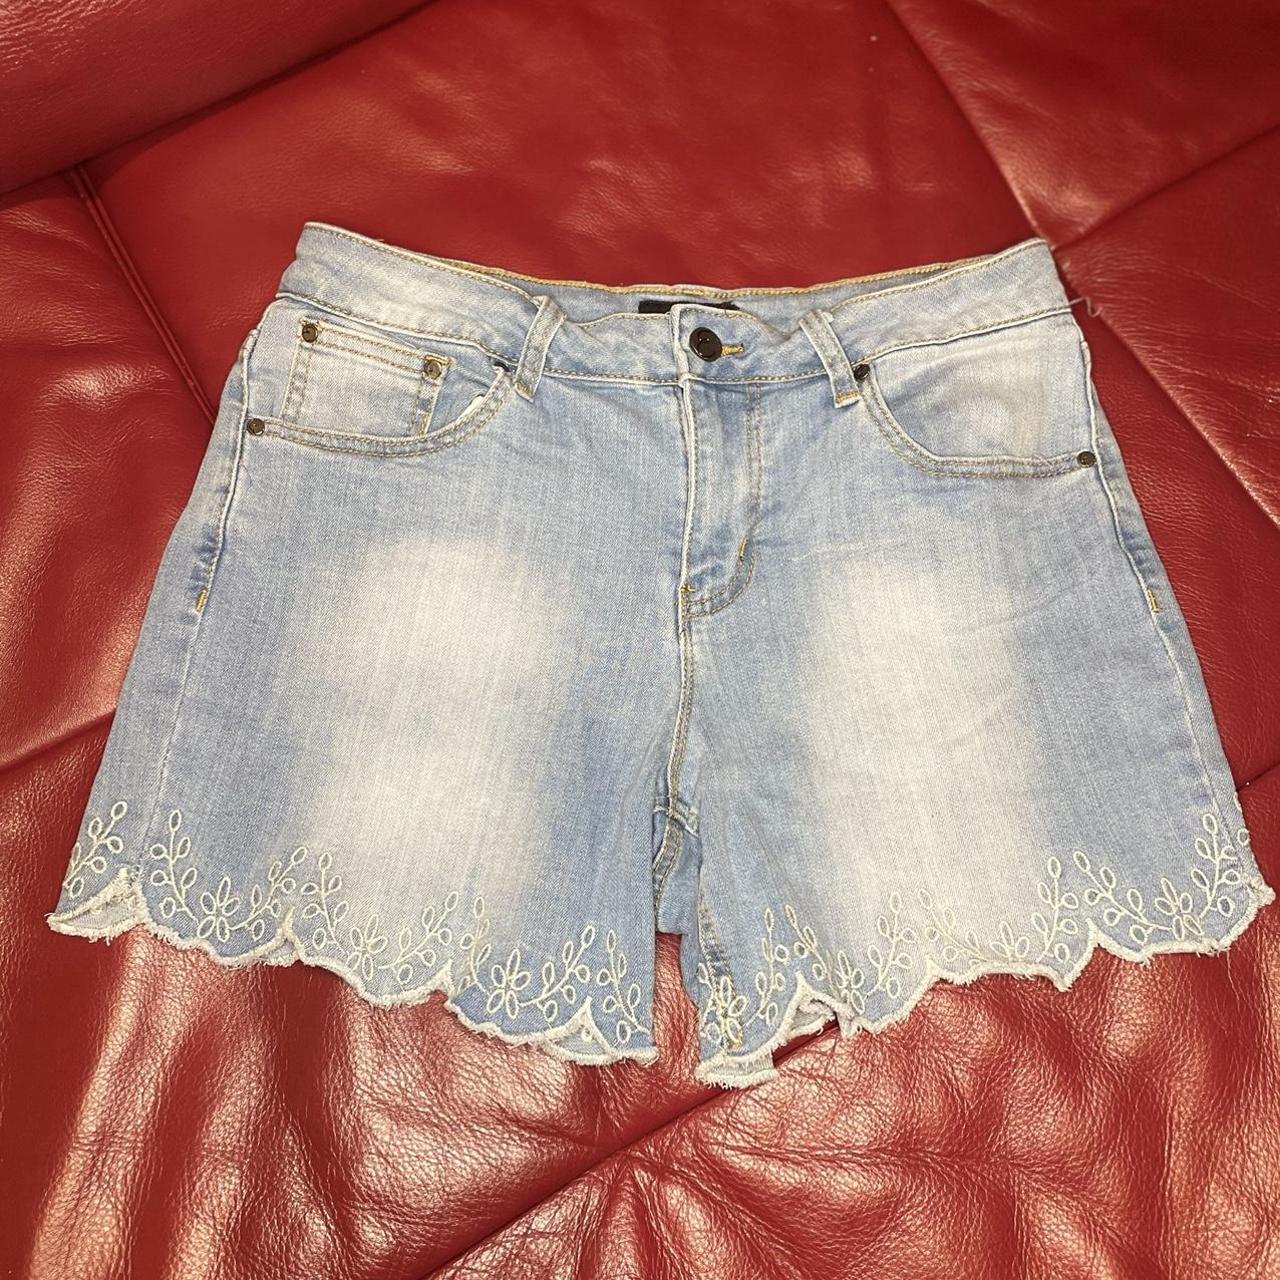 Product Image 1 - High rise jean shorts 💙❤️🌟
.
Size